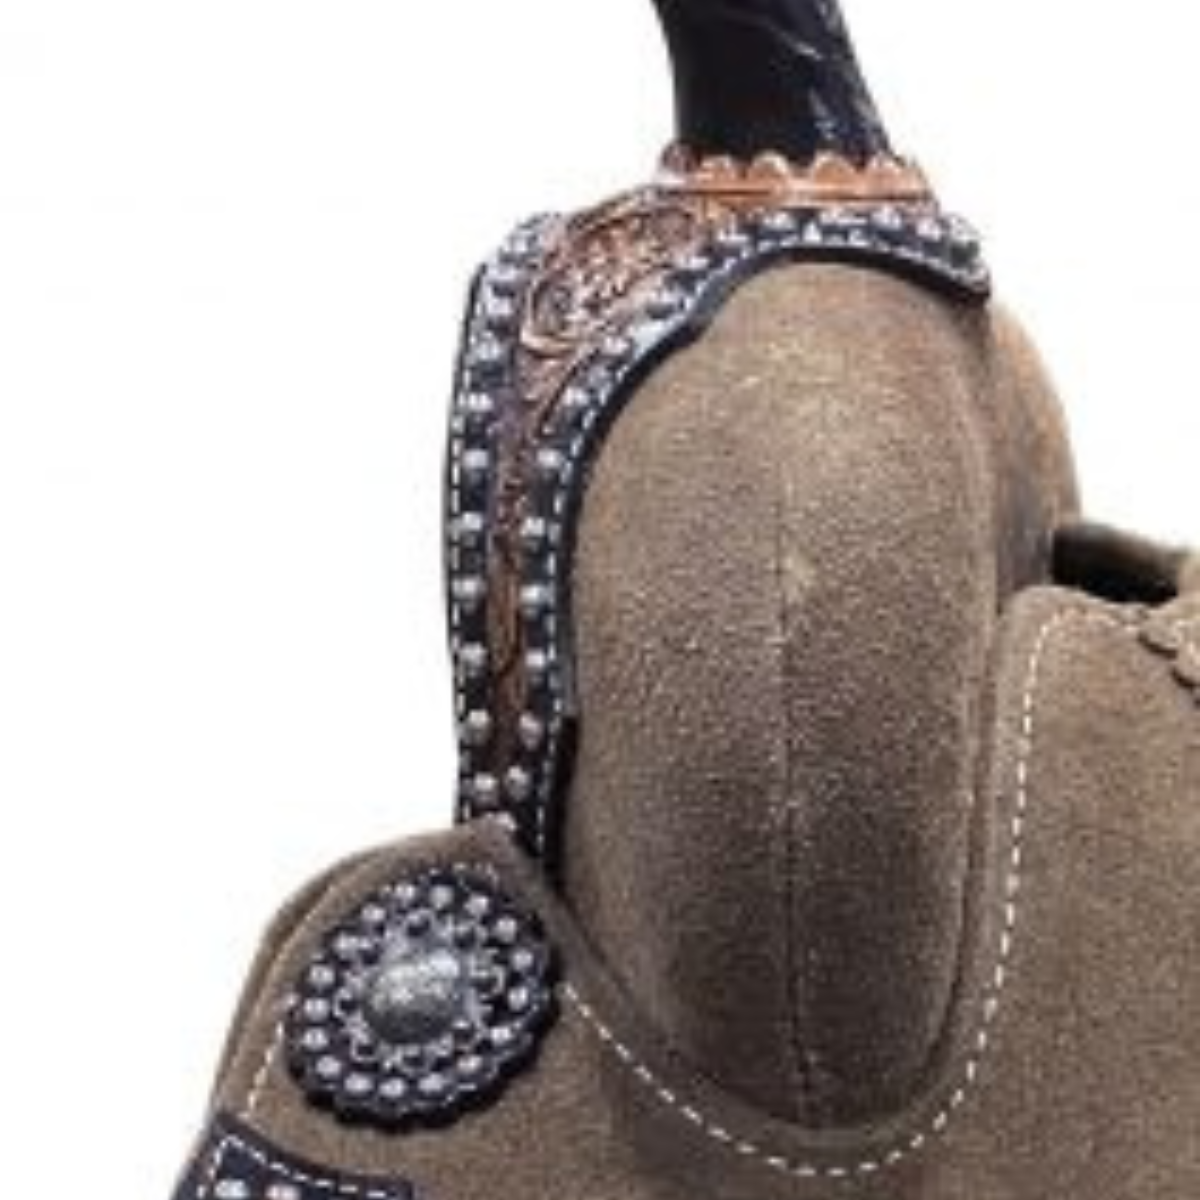 13" Double T Rough Out Barrel Style Saddle With Cheetah Printed Inlay - Double T Saddles